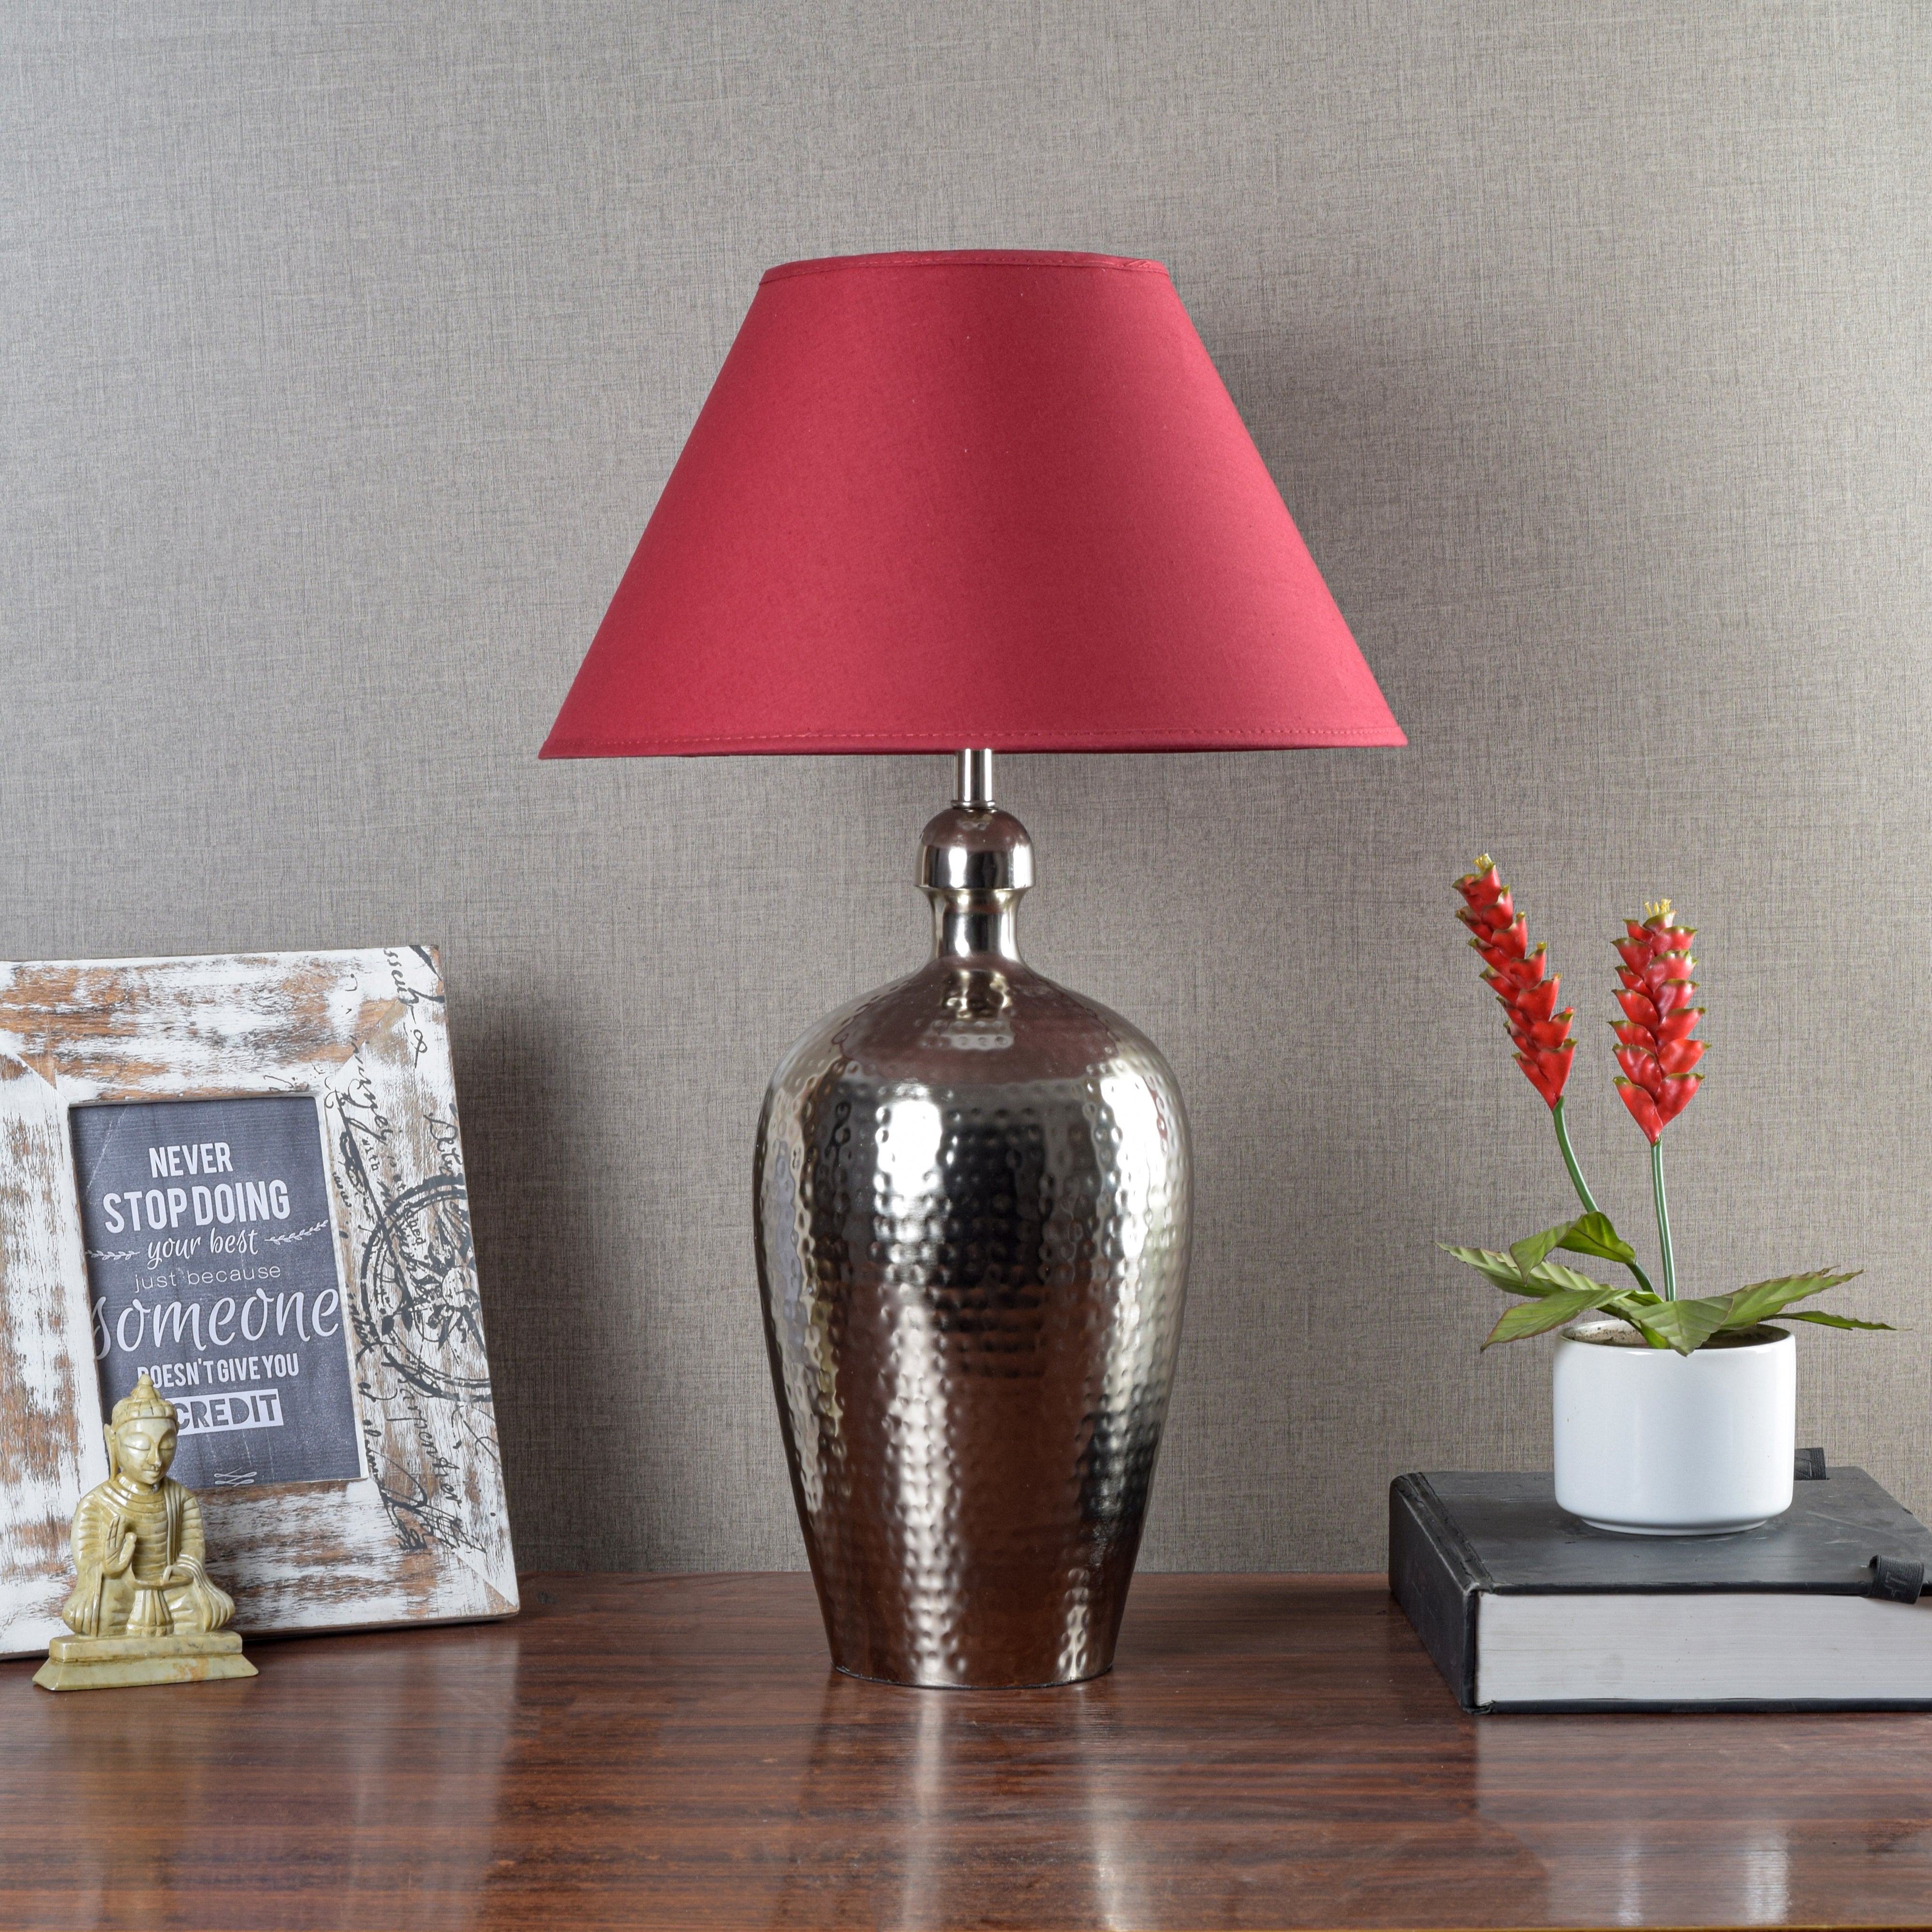 Detec Metal finished with Maroon shade sophisticated table lamp